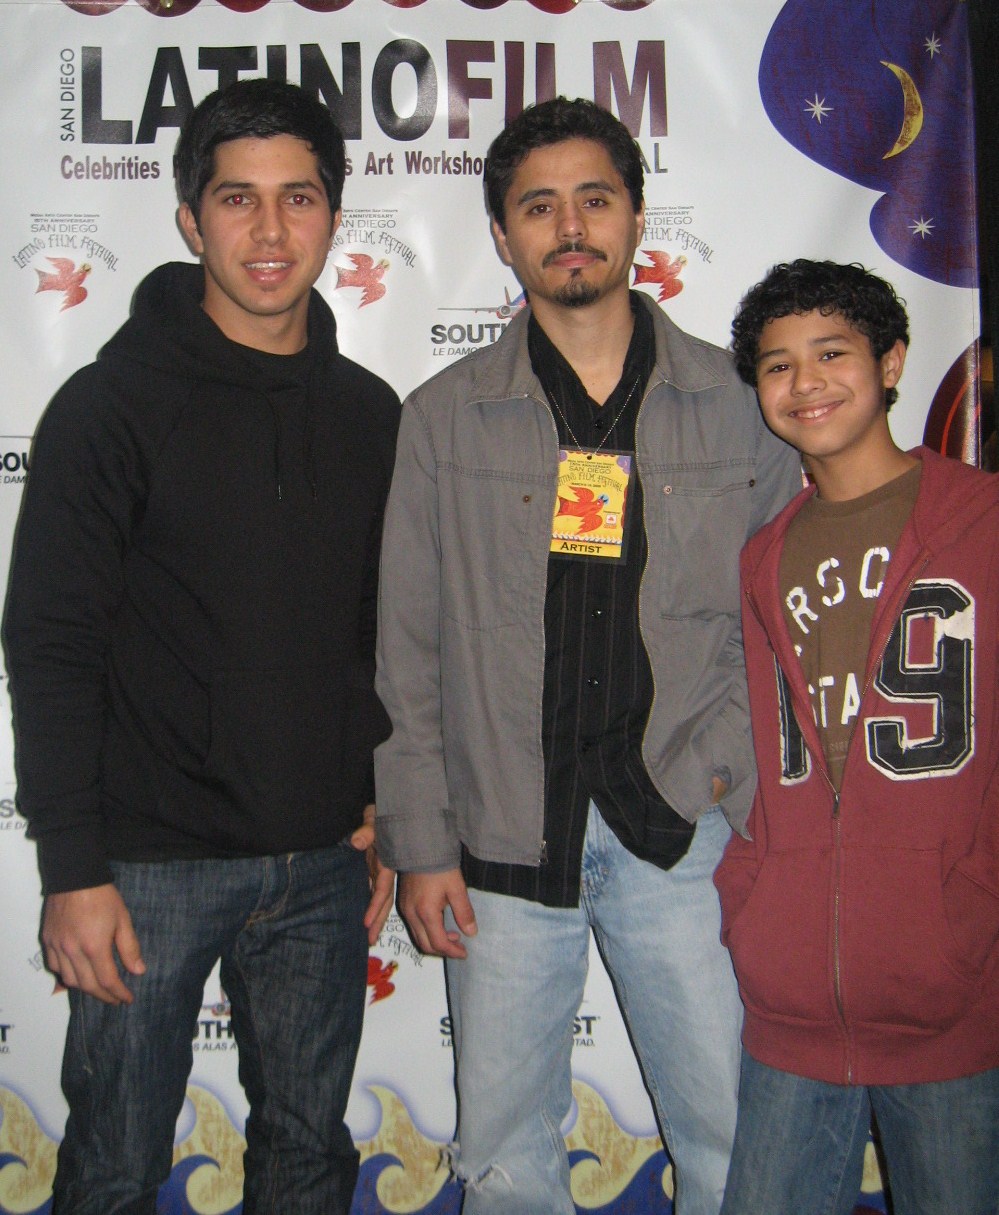 Walter Perez, Abel Becerra and Jeremy Becerra at the Latino Film Festival